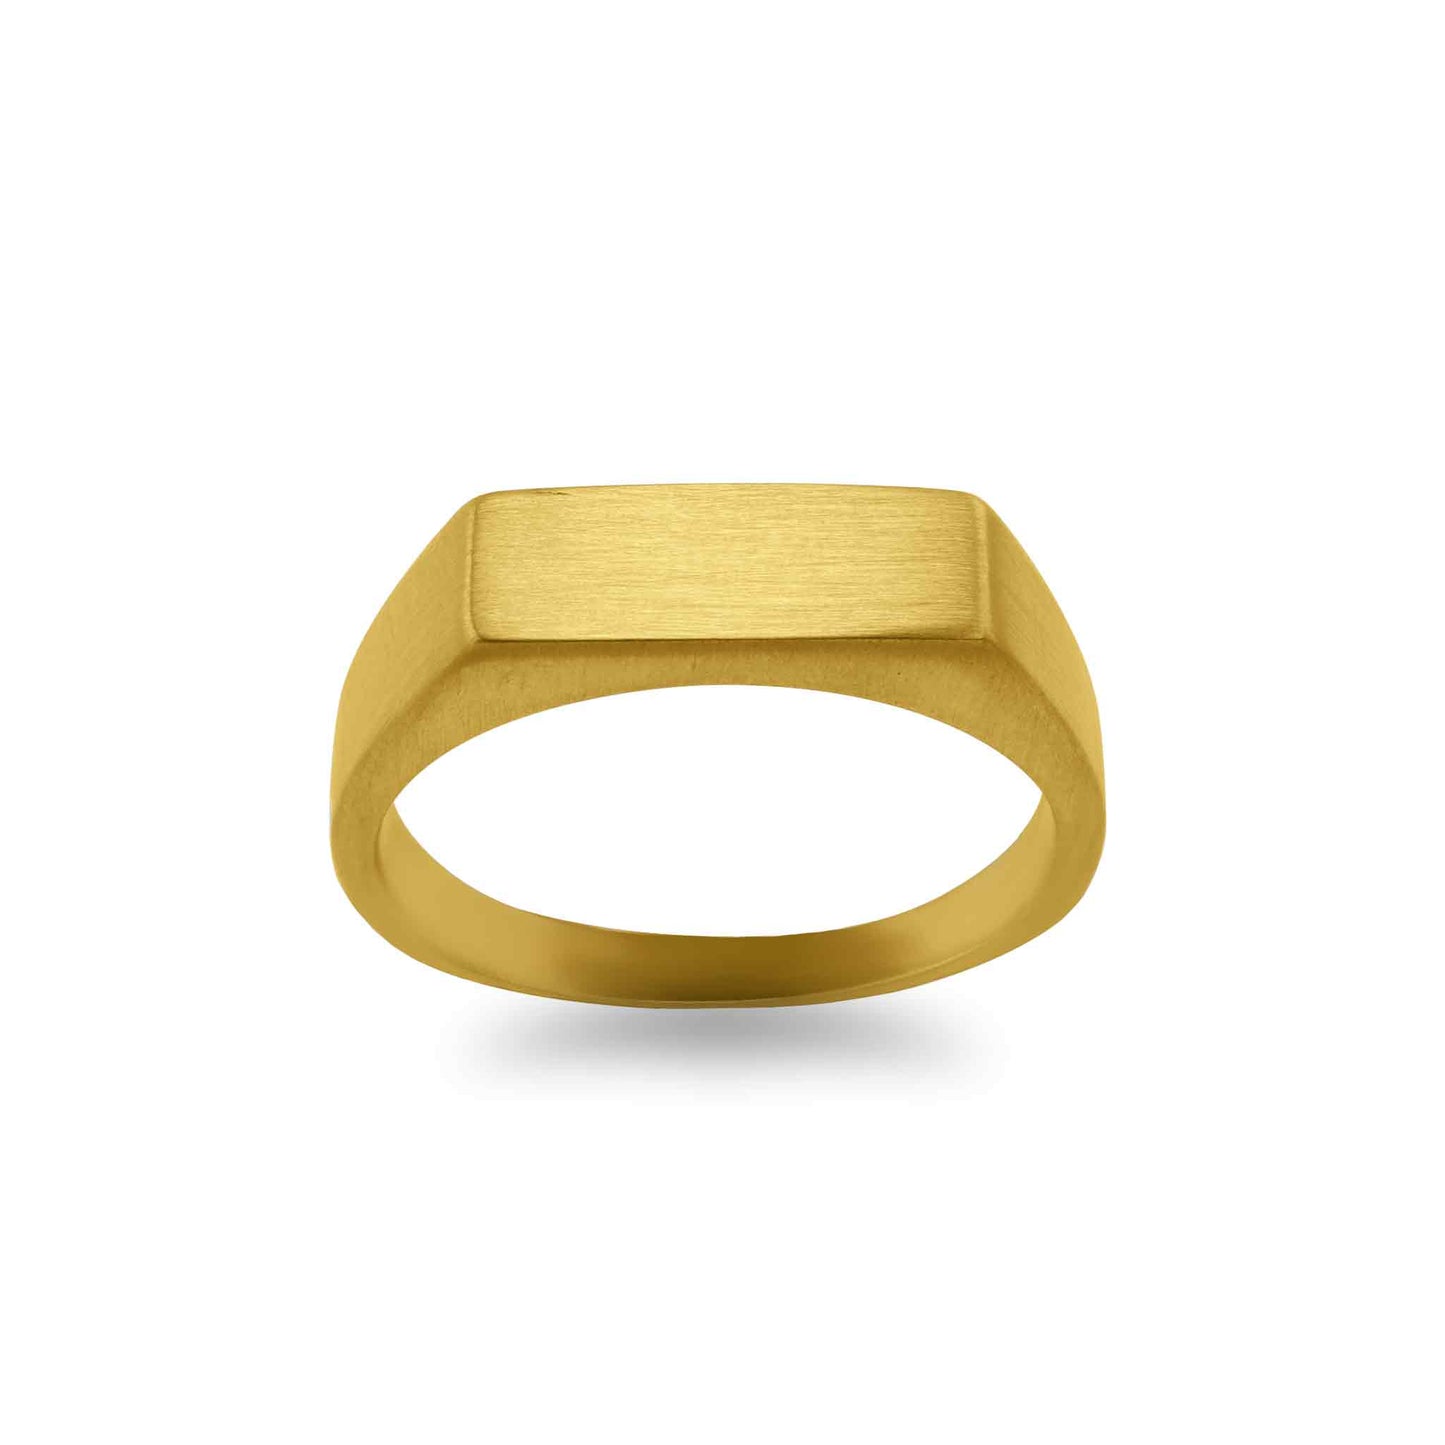 18k Gold PVD Coated Stainless Steel Horizontal Signet Ring